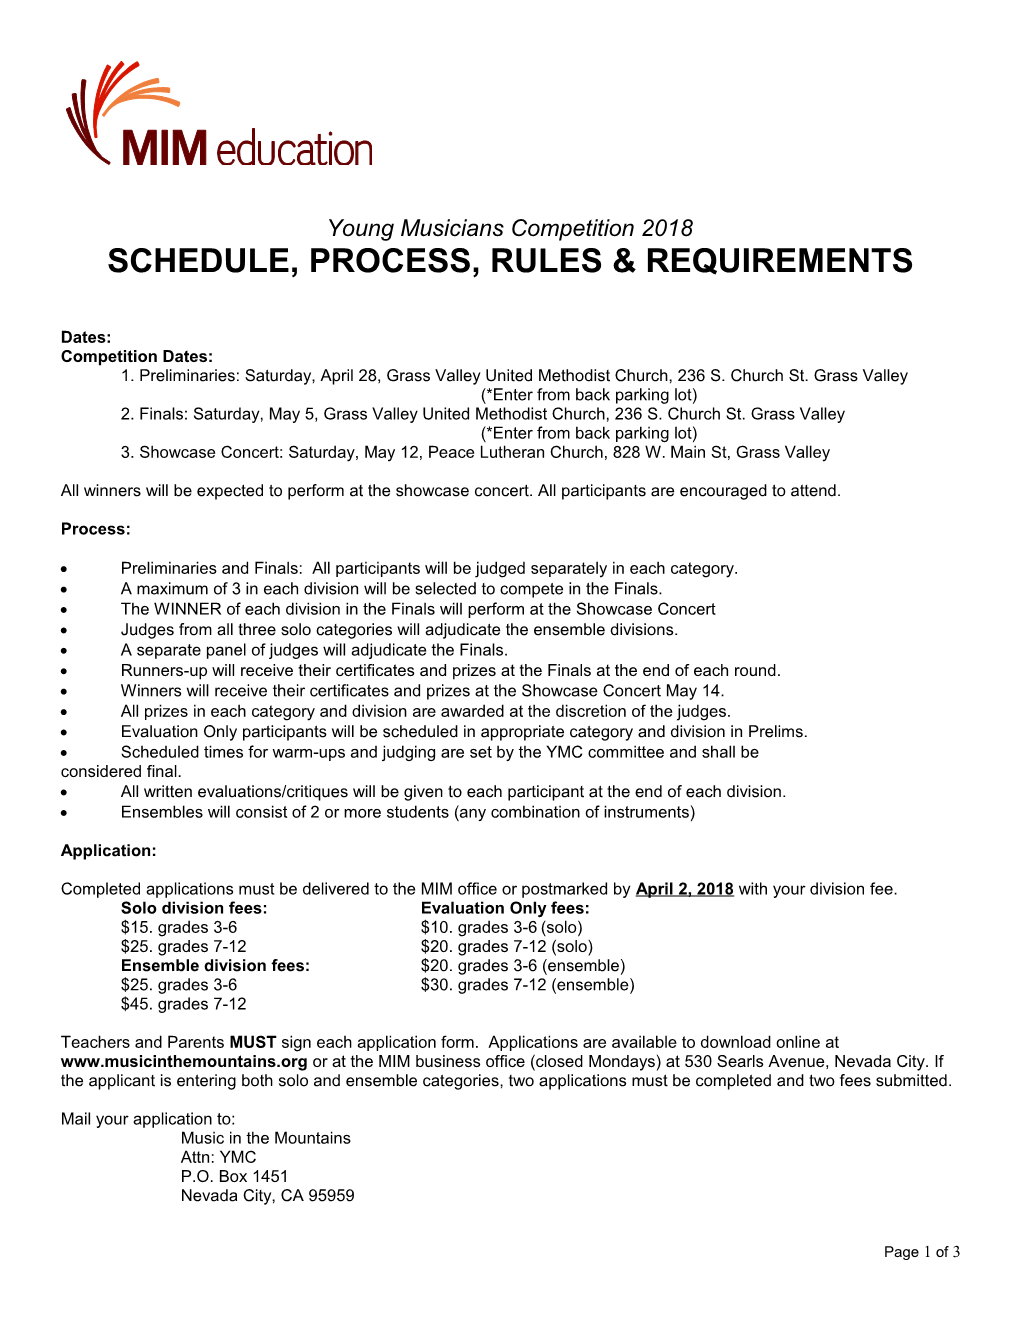 Schedule, Process, Rules & Requirements